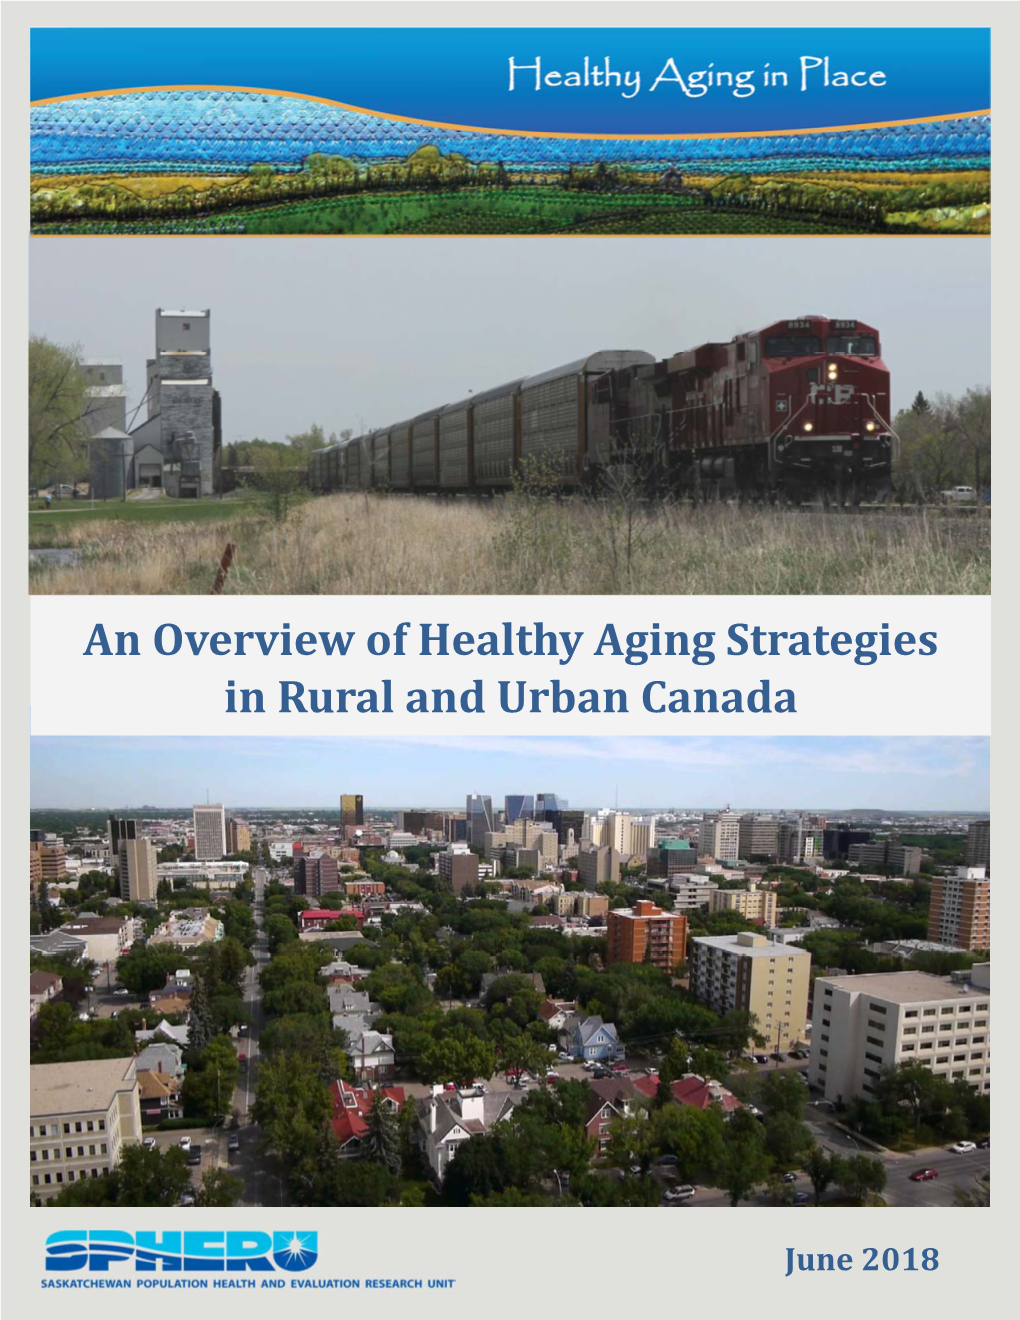 An Overview of Healthy Aging Strategies in Rural and Urban Canada